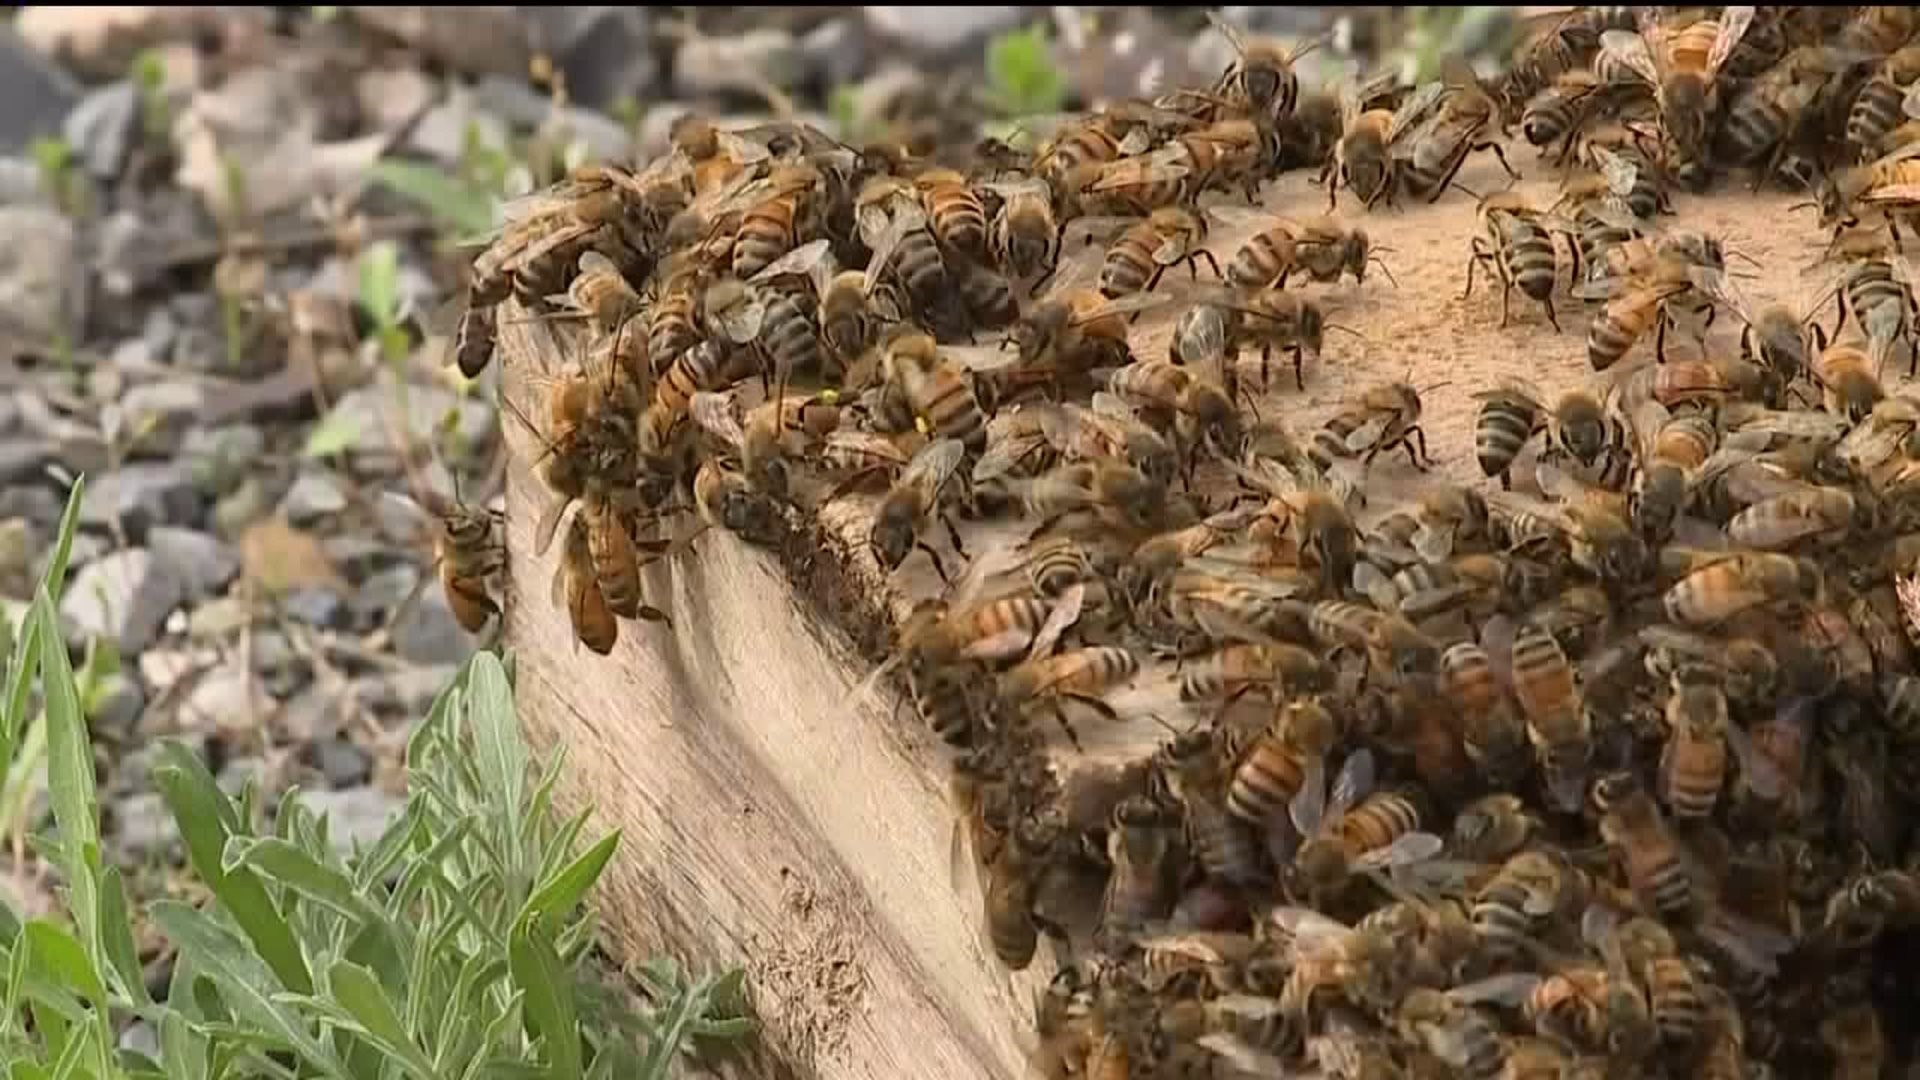 The Buzz About Bees